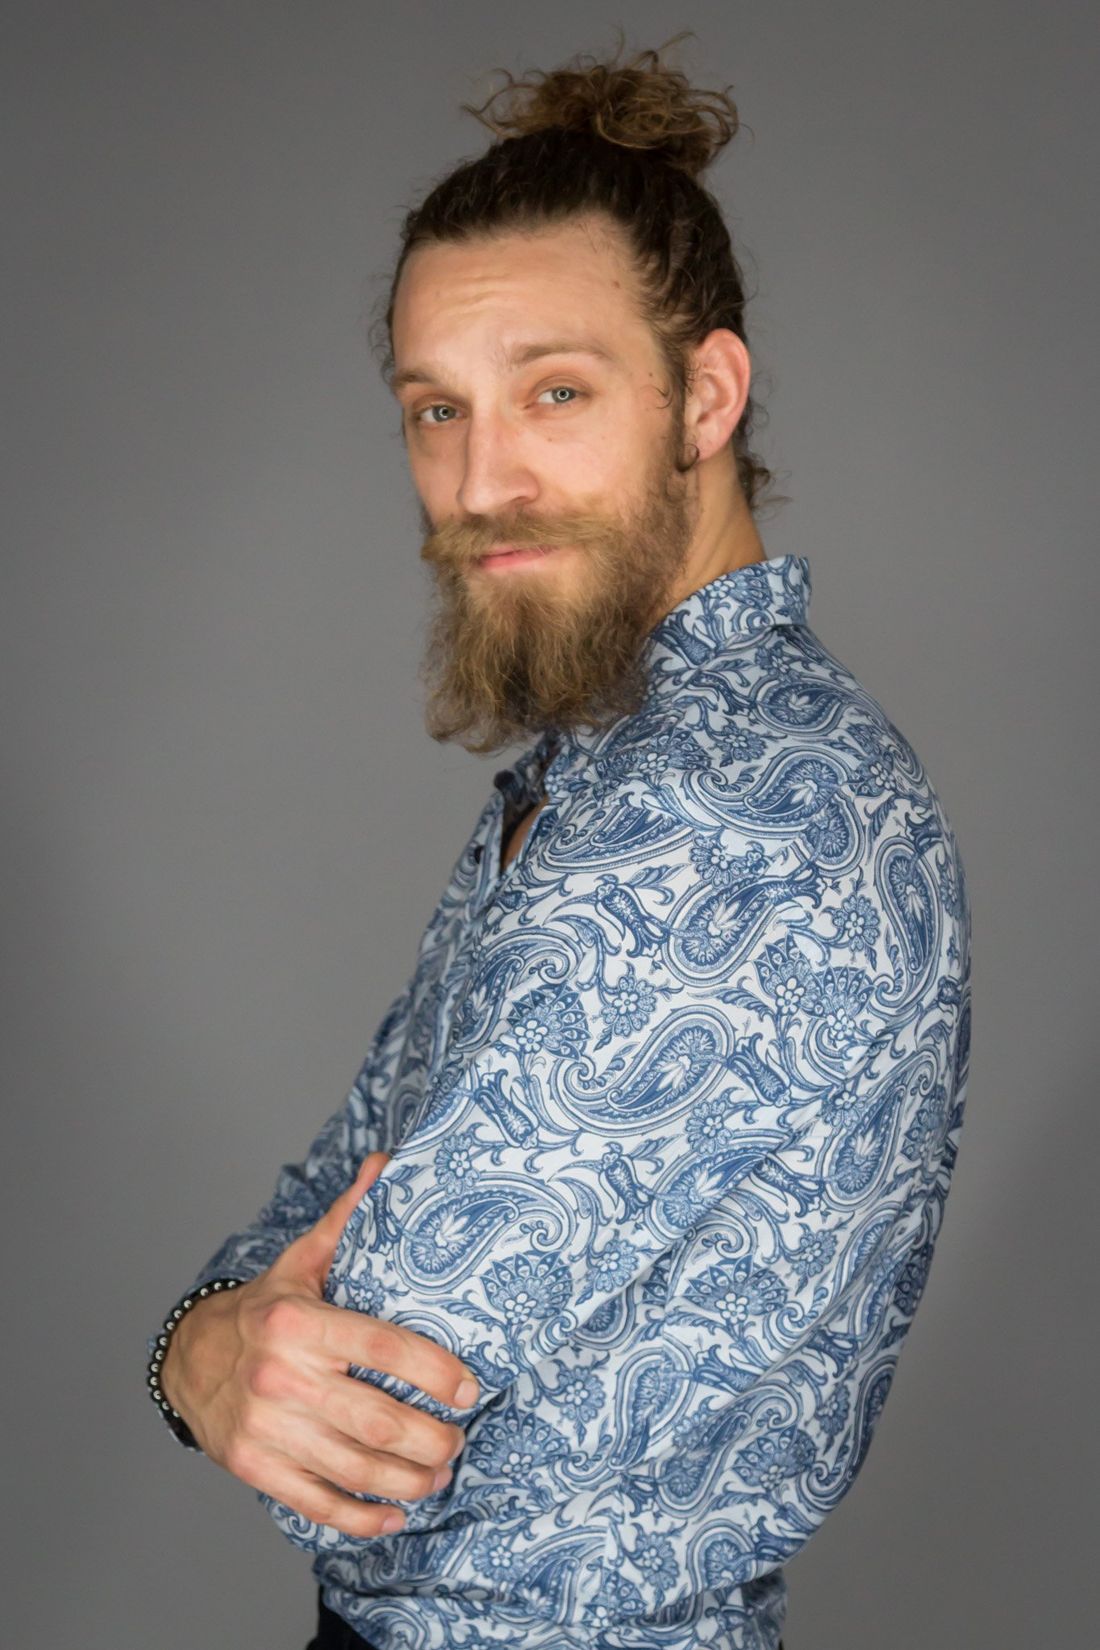 A man with brown hair in a bun and a beard posing in the studio in a blue and white paisley button up shirt